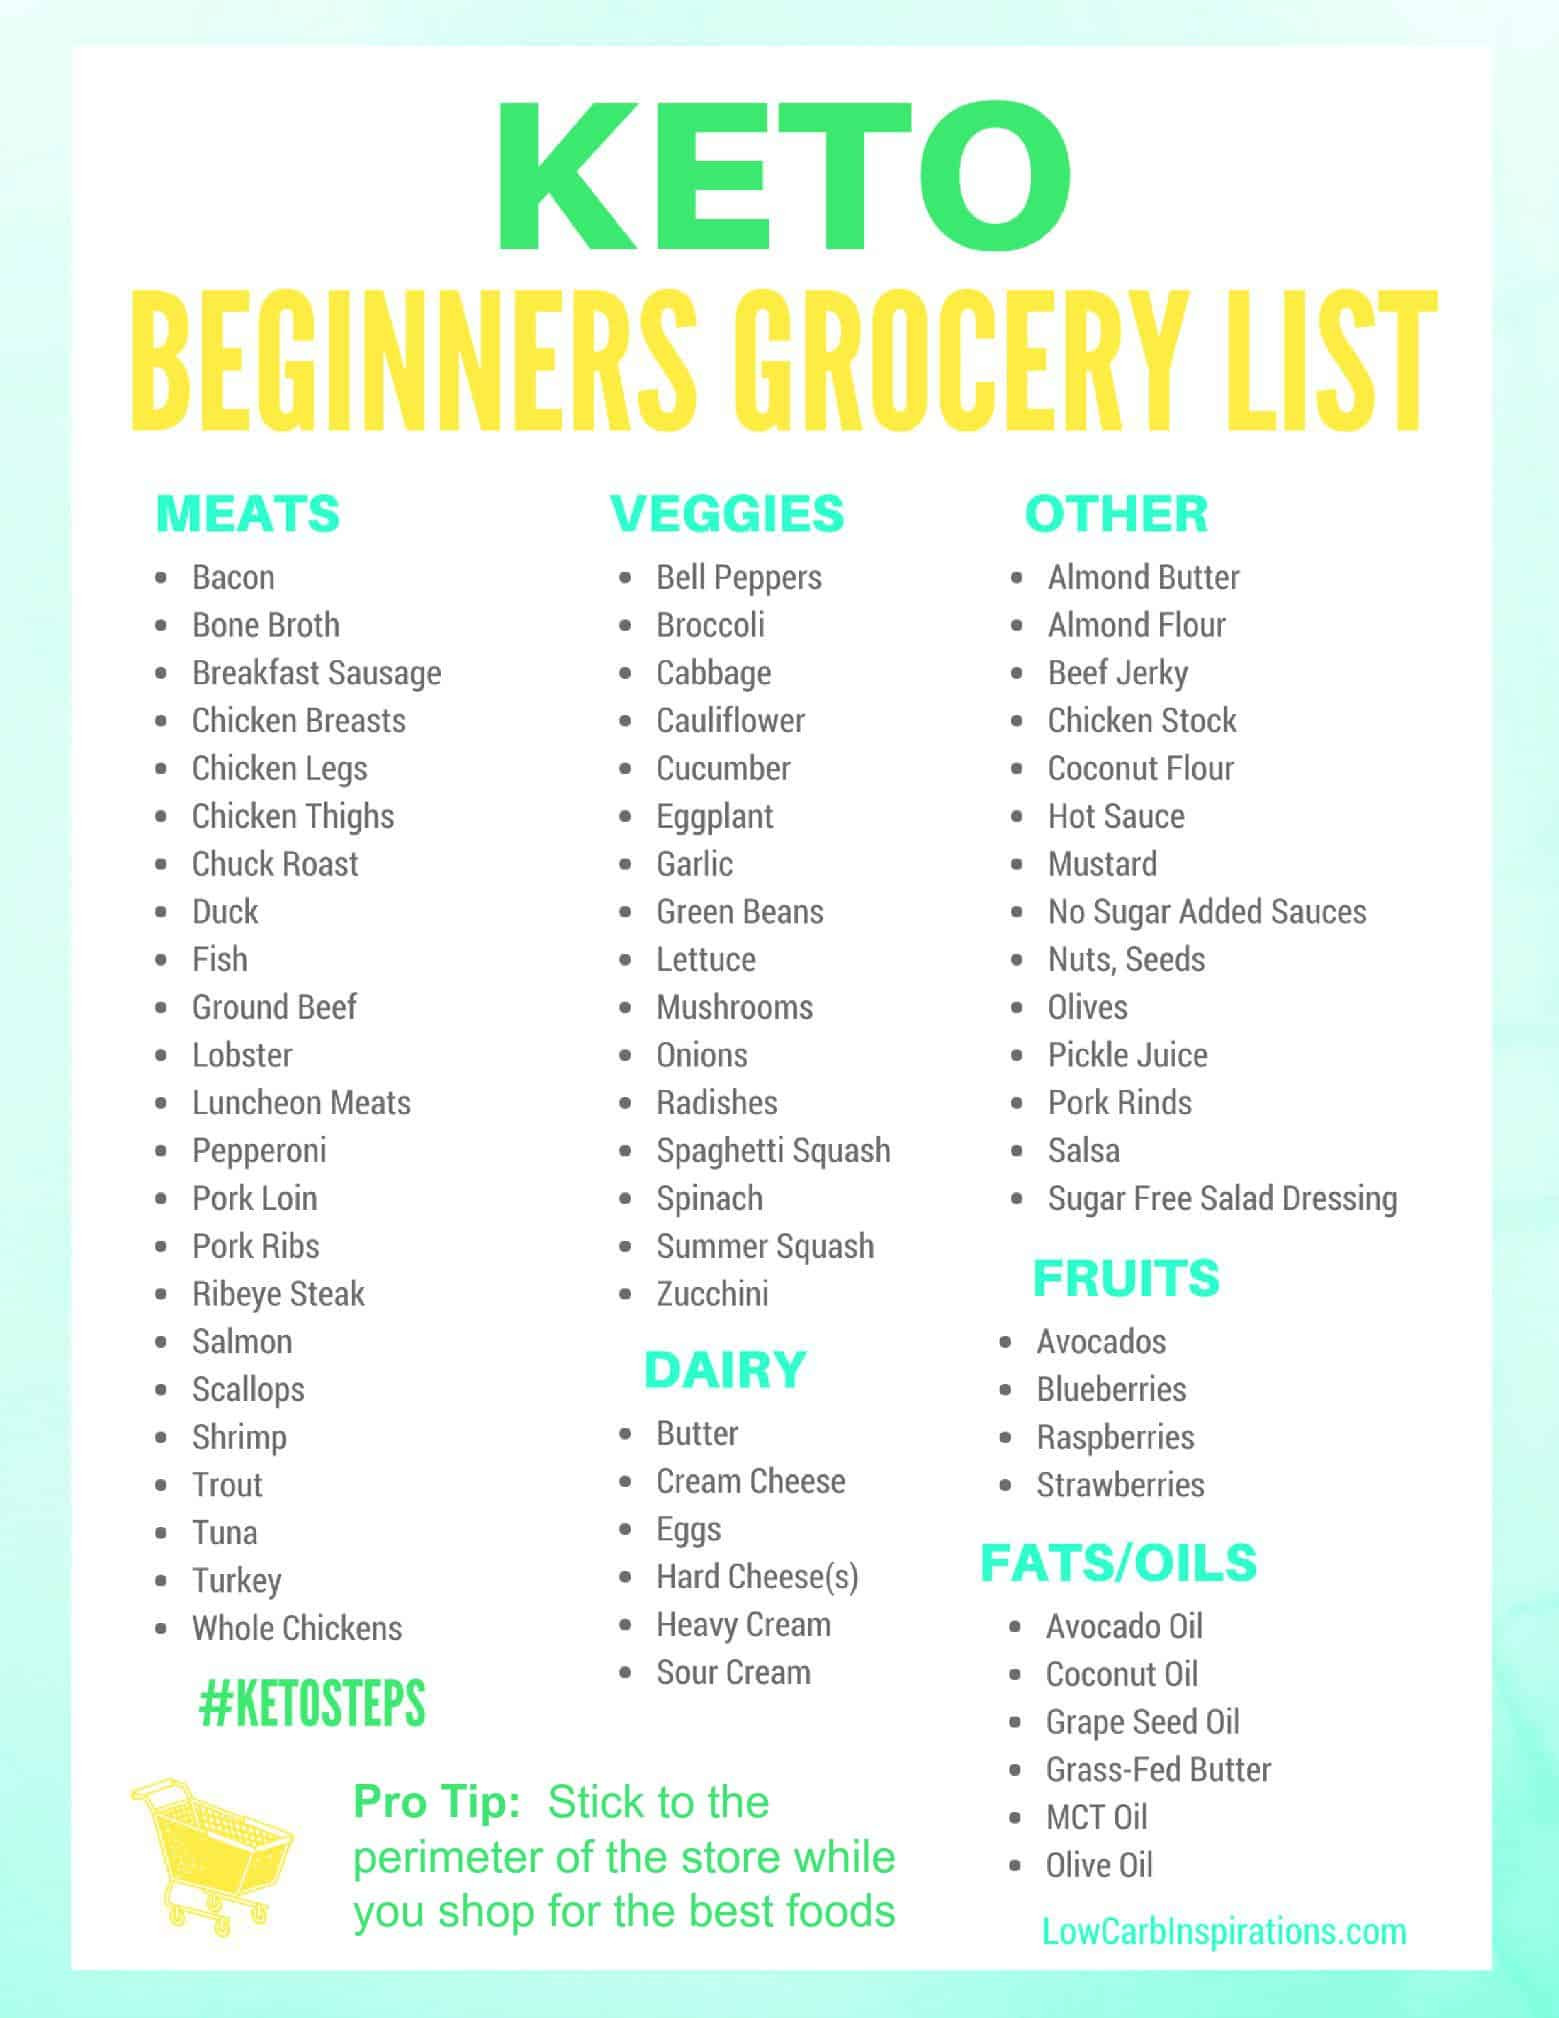 Keto Diet For Beginners Meal Plan Easy With Grocery List
 Keto Grocery List for Beginners iSaveA2Z